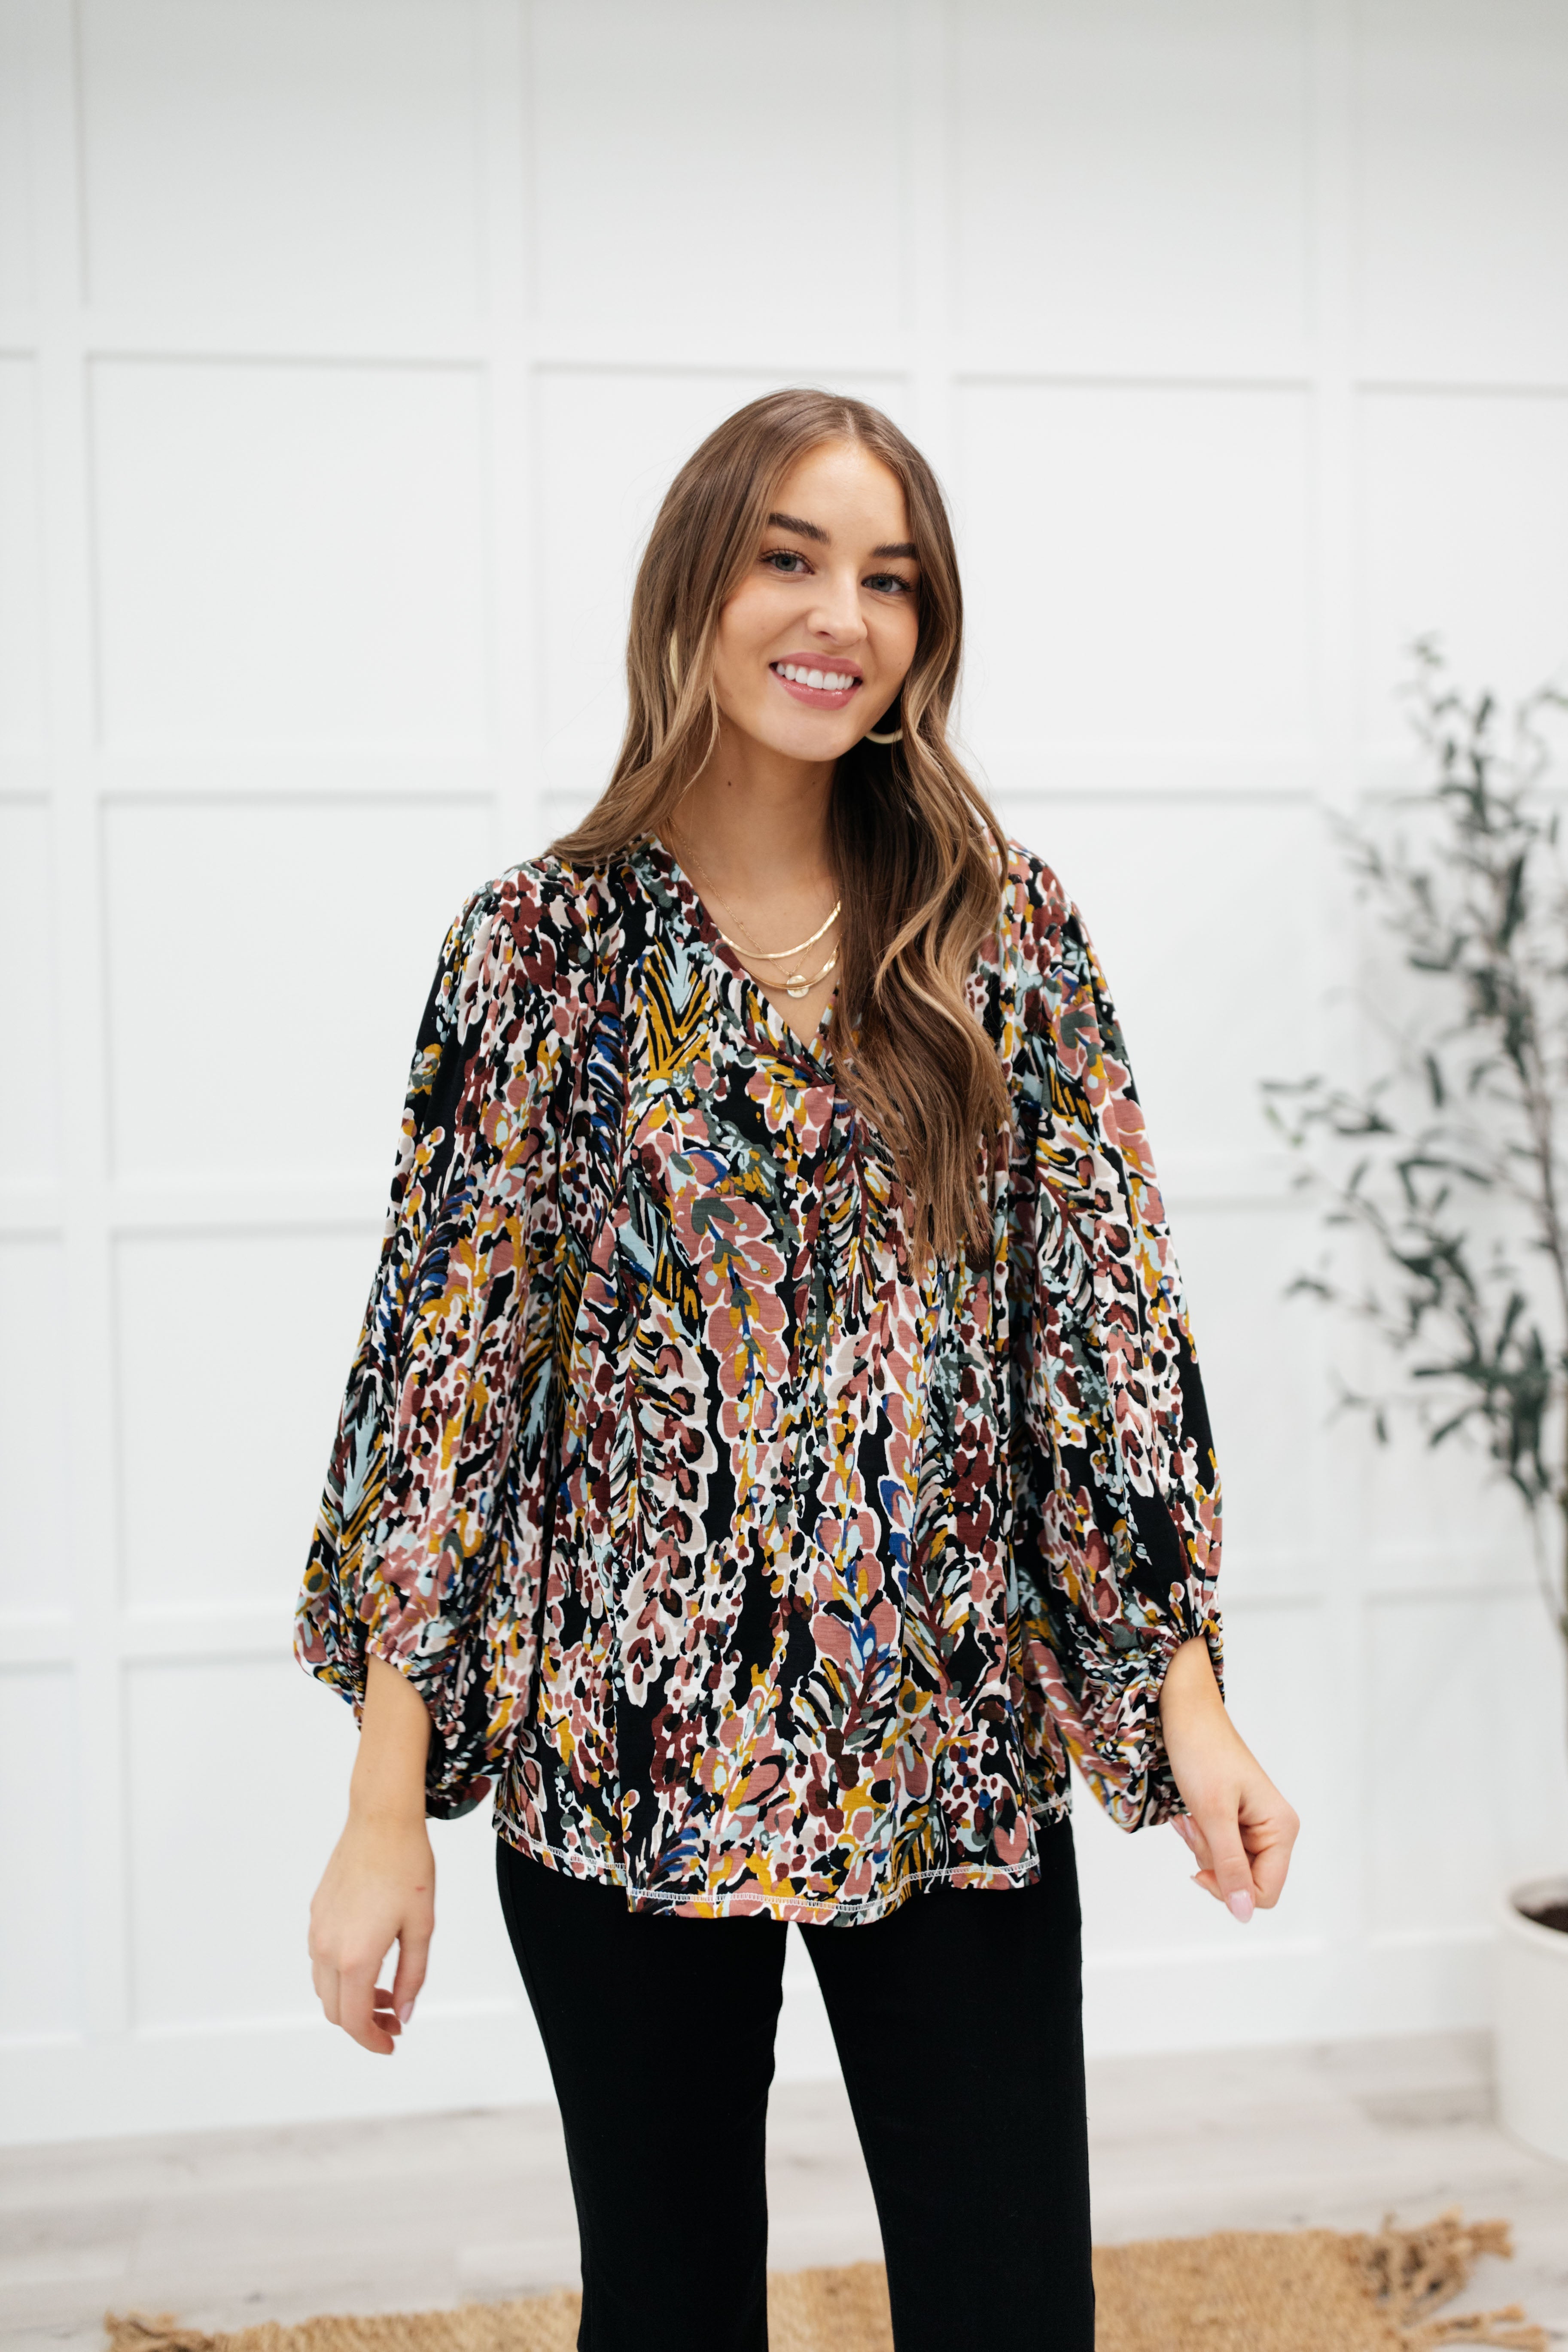 Blossom Bliss Top in Black